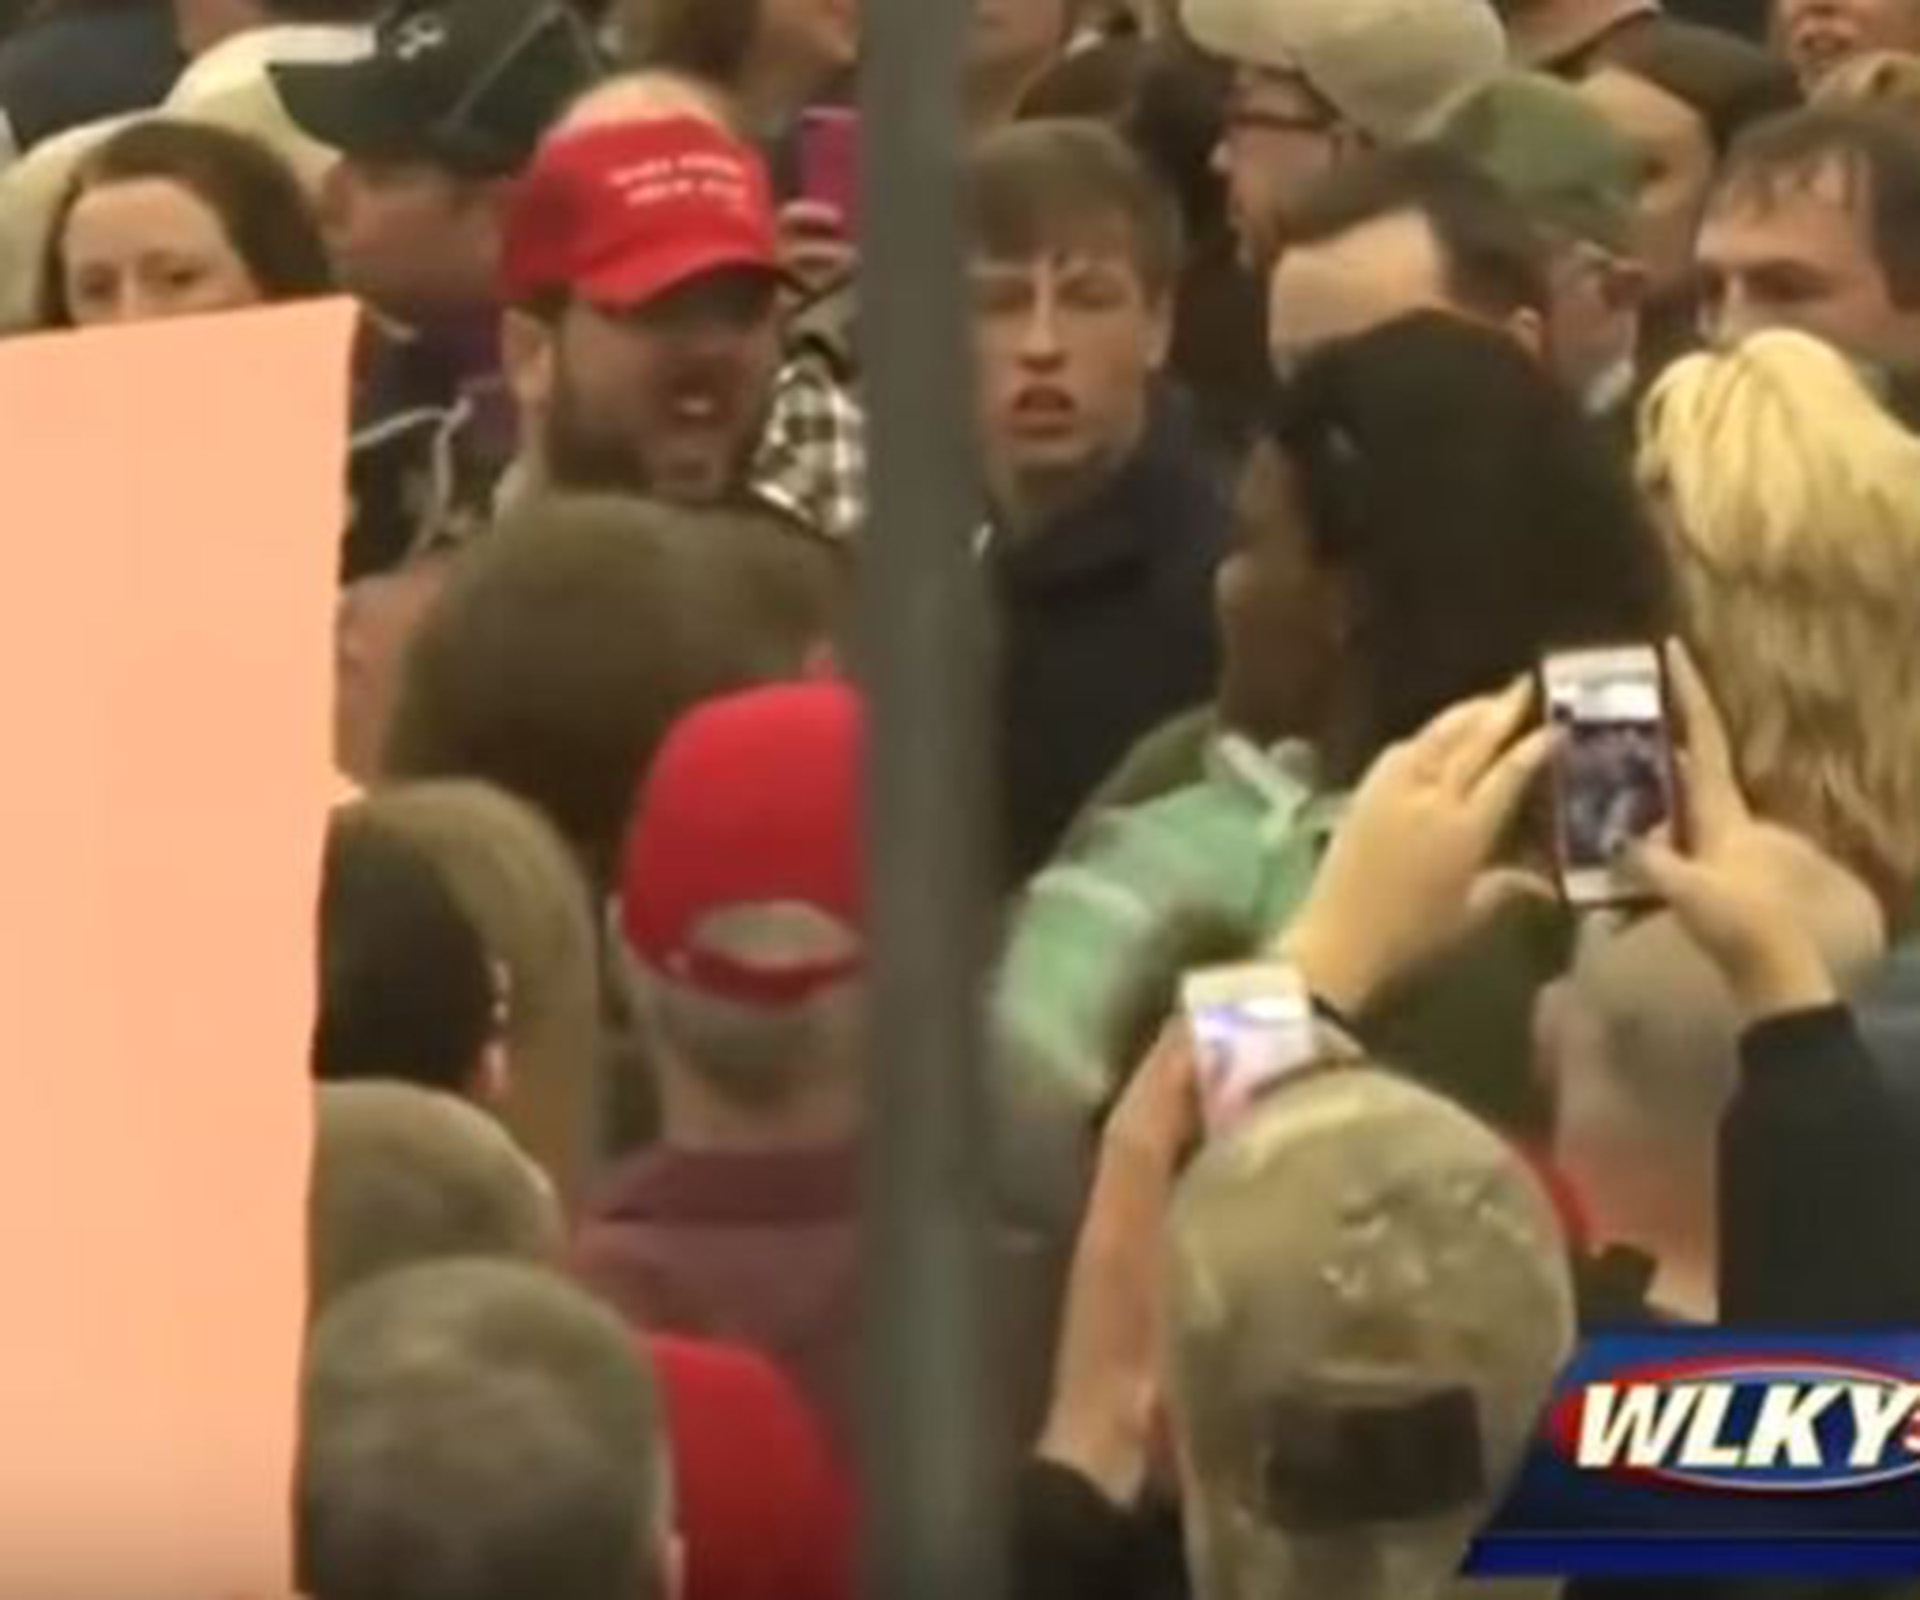 Shocking video of young woman manhandled at Donald Trump rally